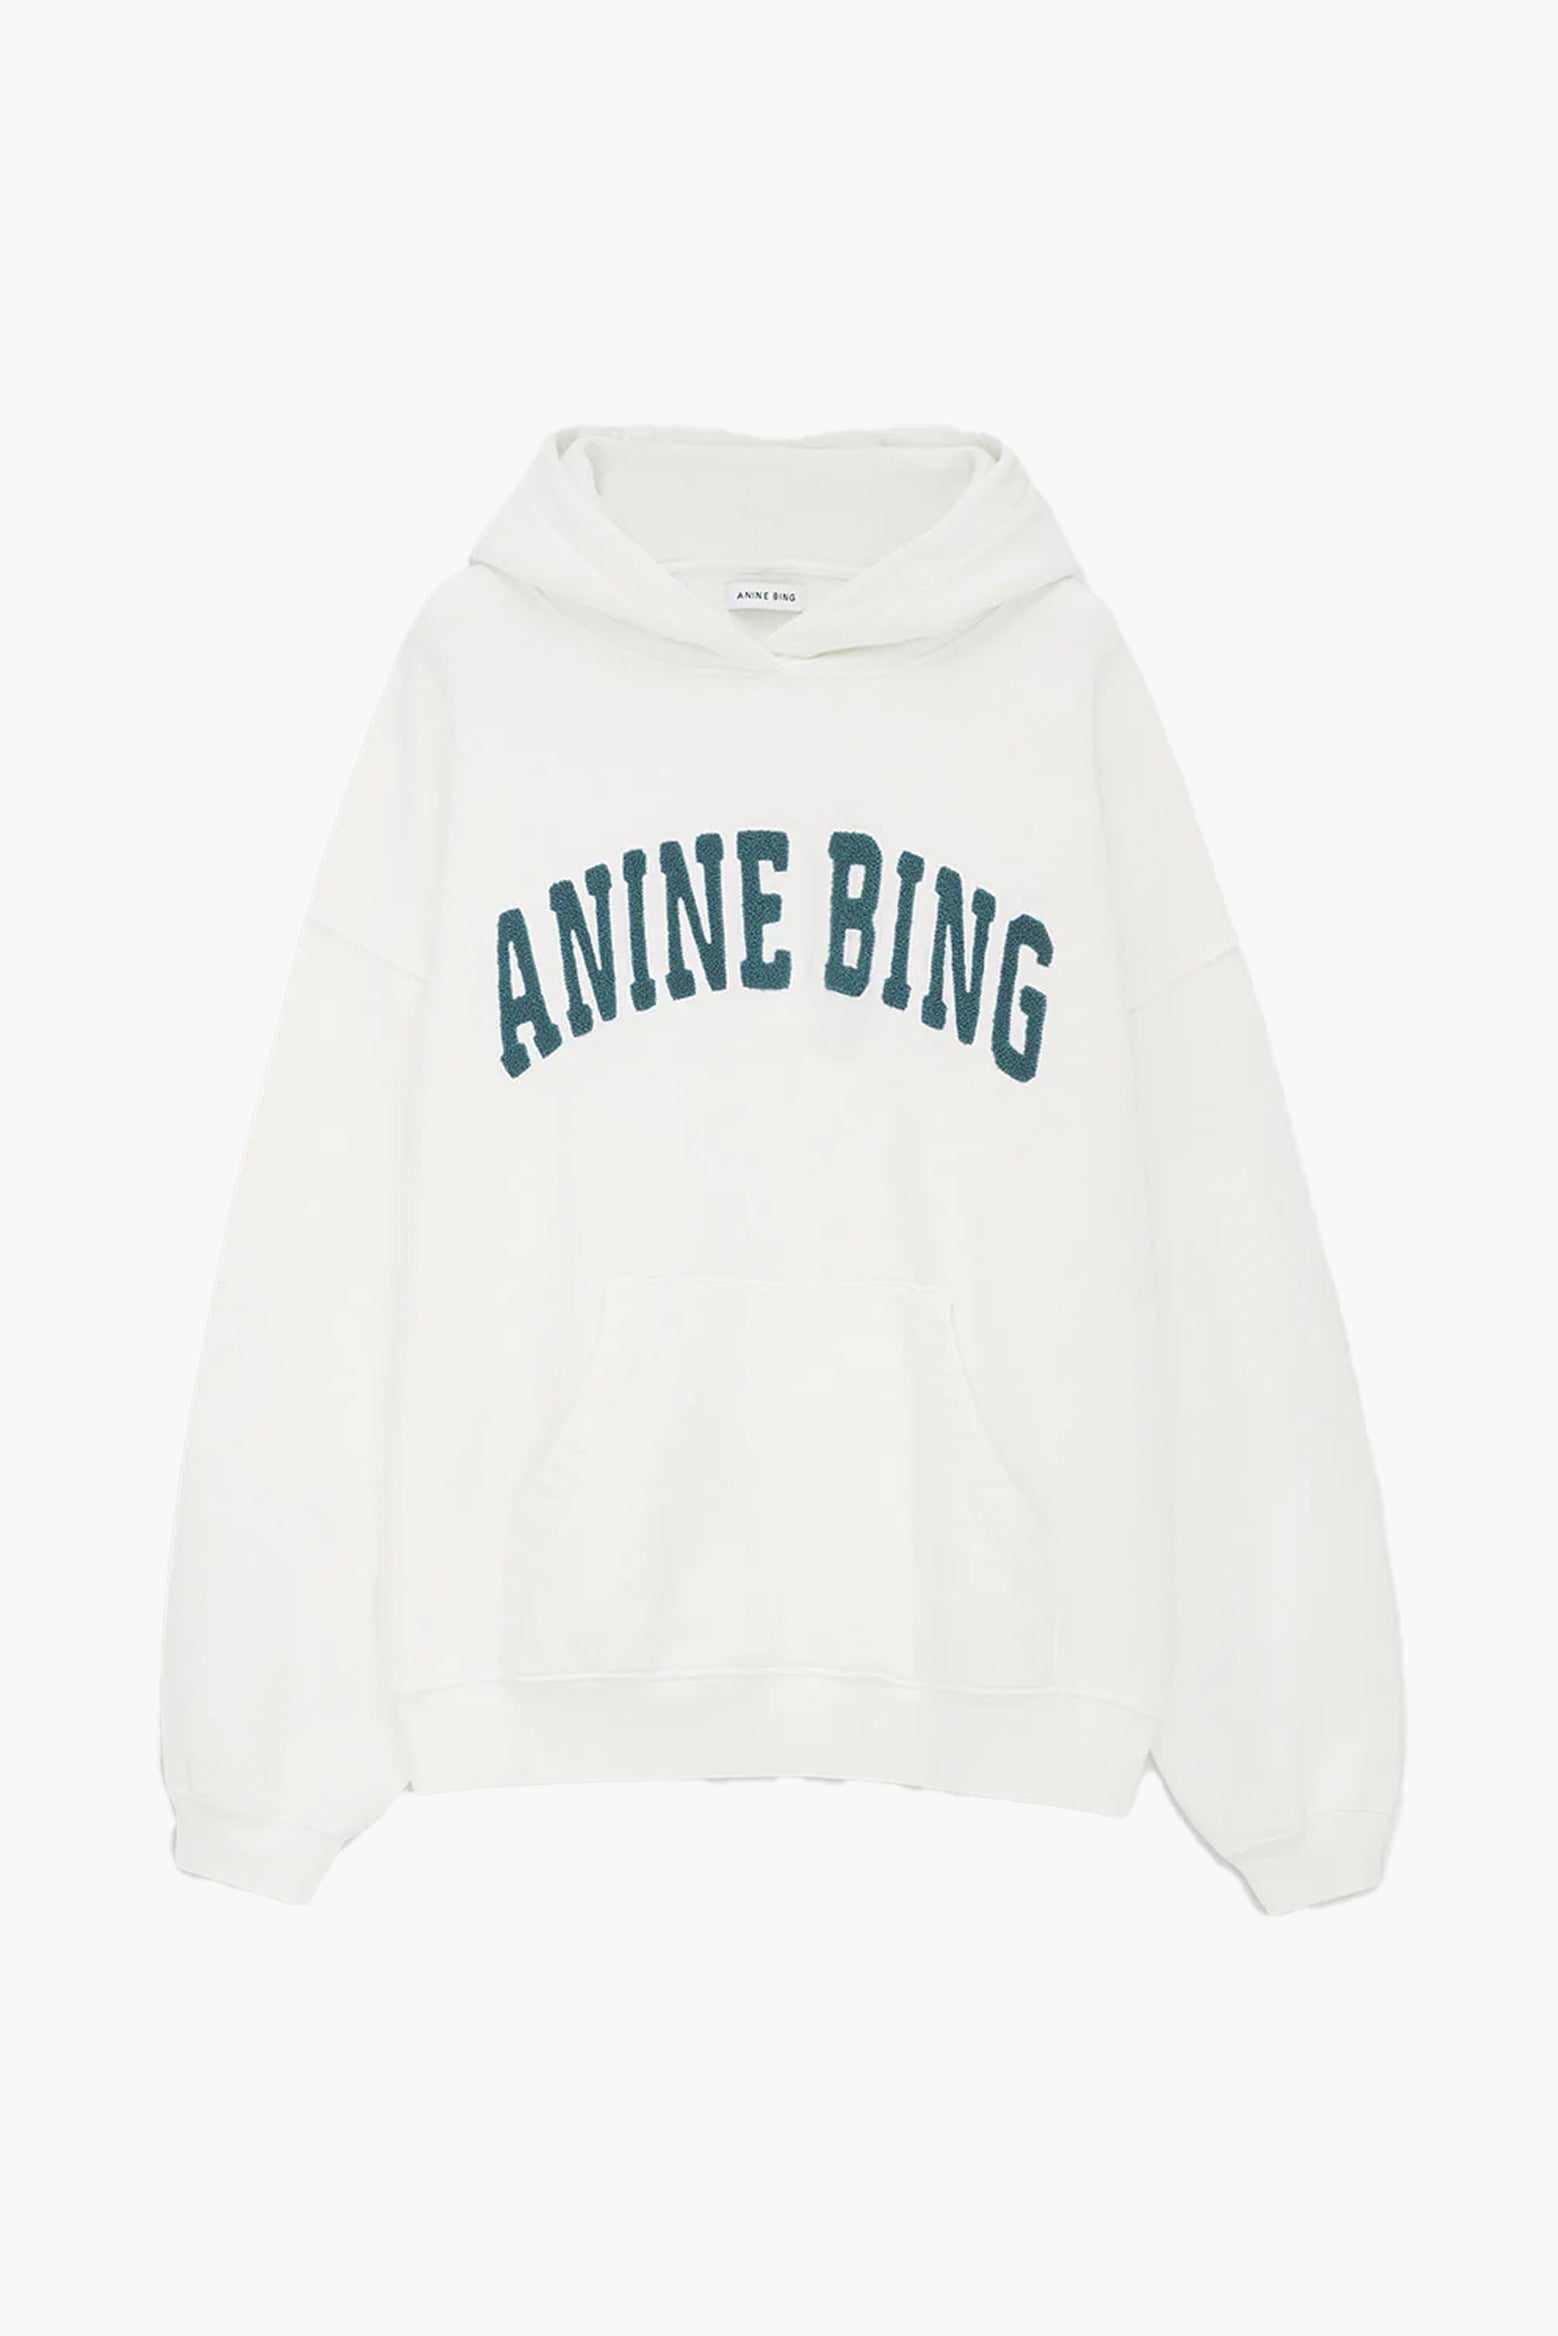 Anine Bing Harvey Sweatshirt in Ivory and Dark Sage available at The New Trend Australia. 